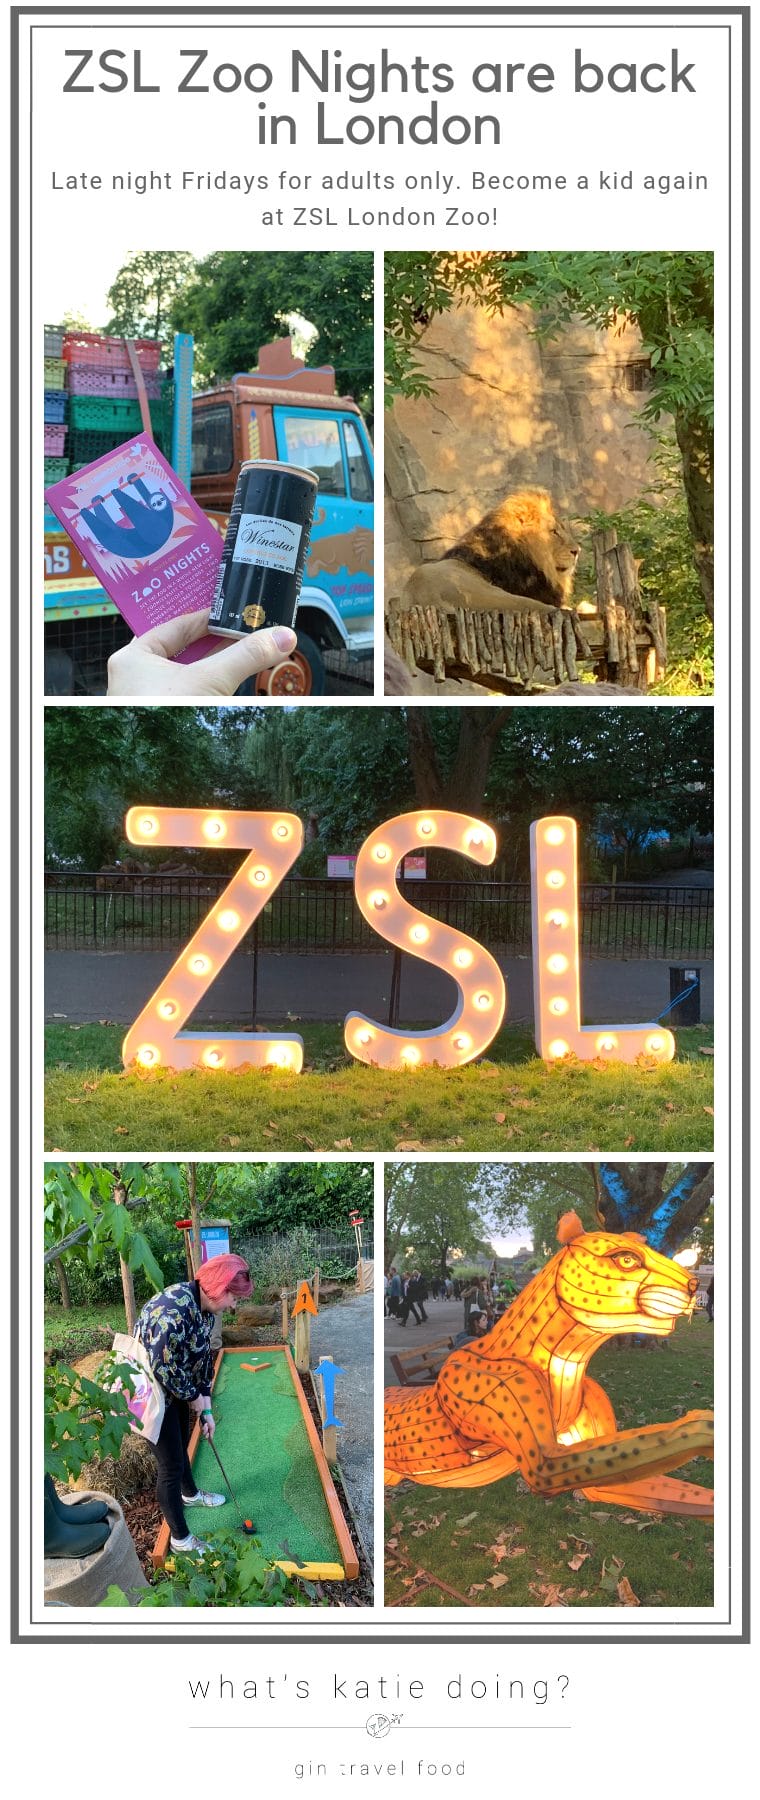 ZSL Zoo Nights are back in London., Late night Fridays for adults only - big kids take over ZSL London Zoo this Summer!